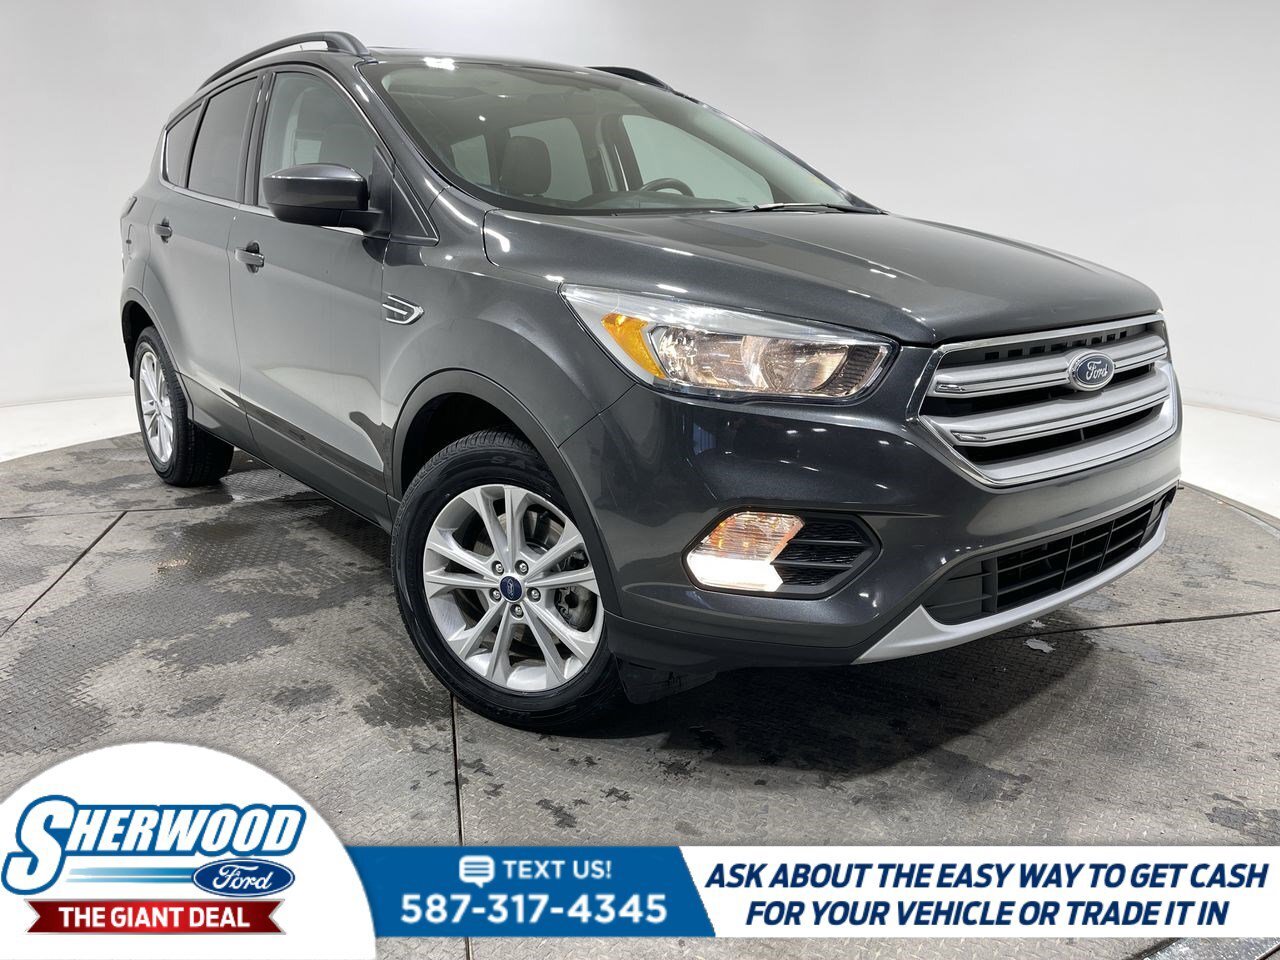 2018 Ford Escape SE 4WD - $0 Down $93 Weekly - MOONROOF - NAV